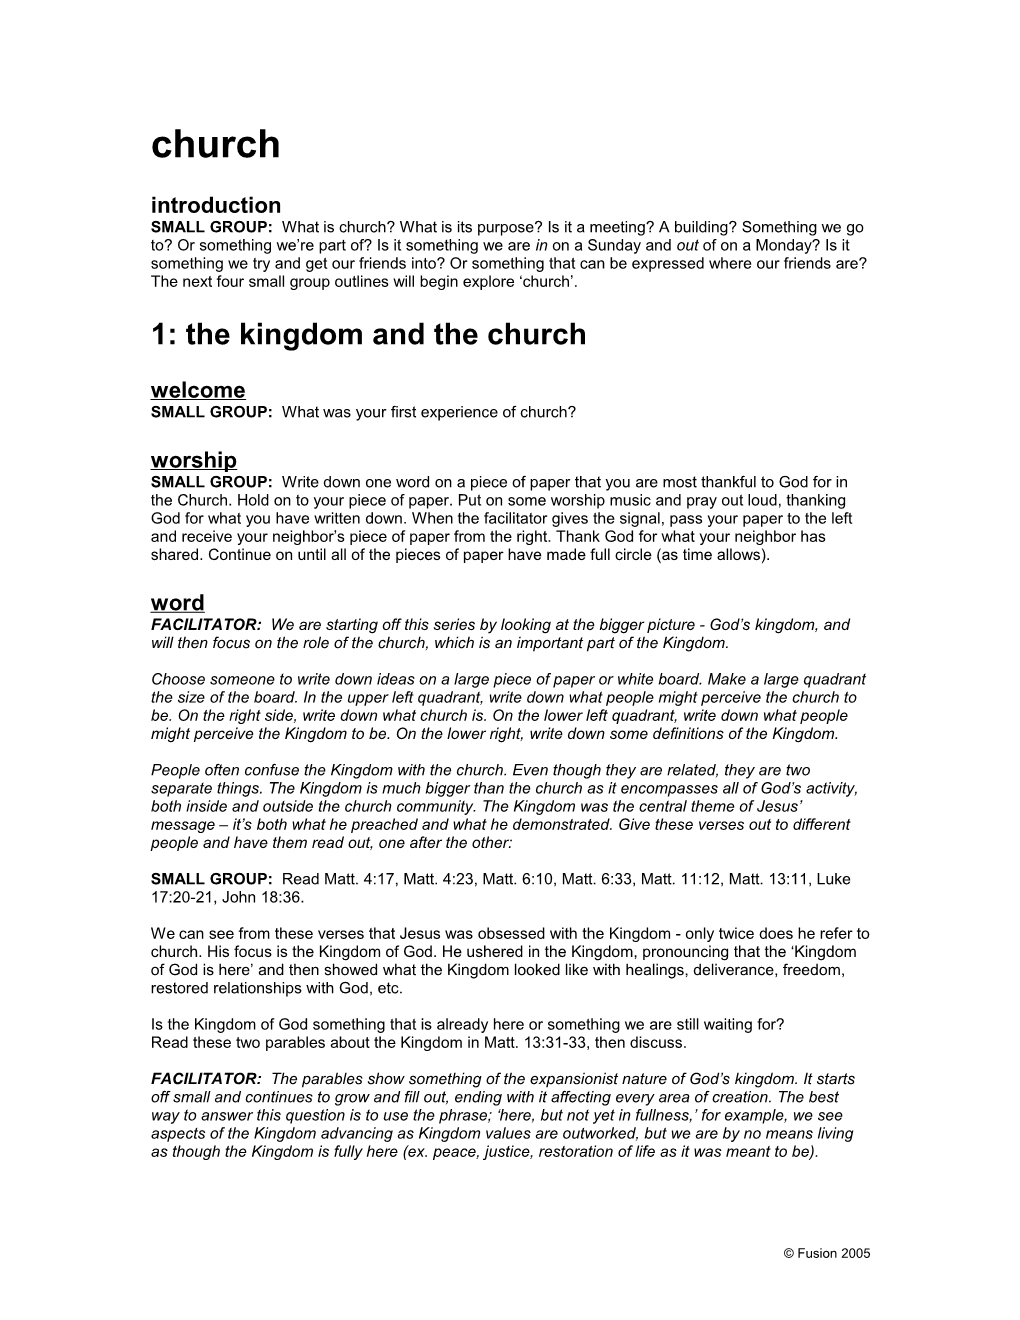 1: the Kingdom and the Church